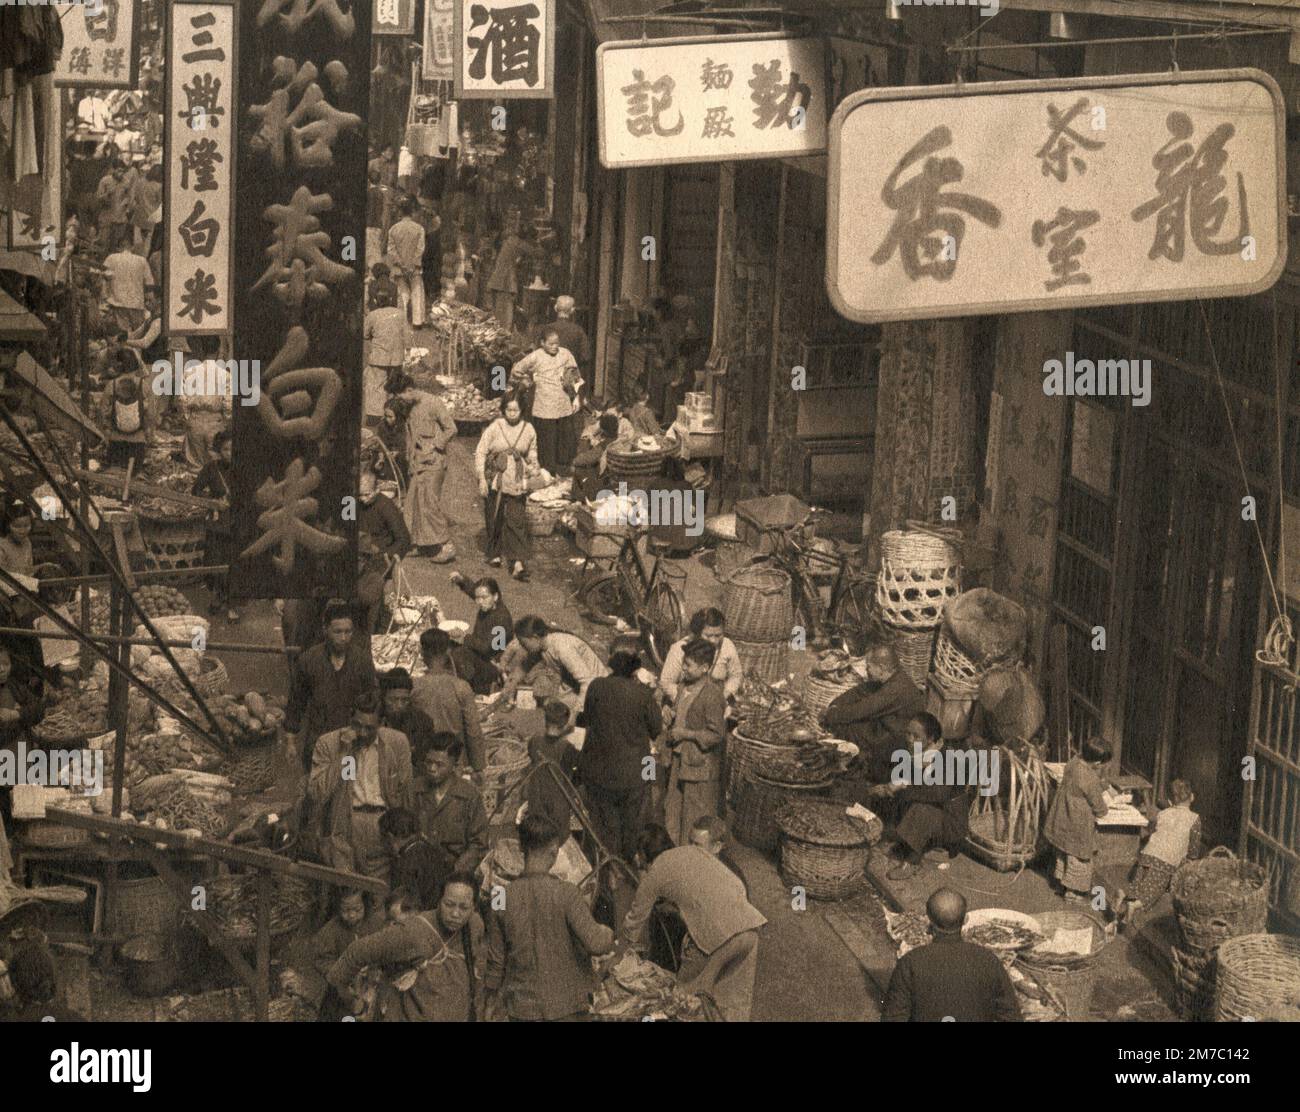 South East Asia town street from the documentary film Lost Continent, Italy 1955 Stock Photo